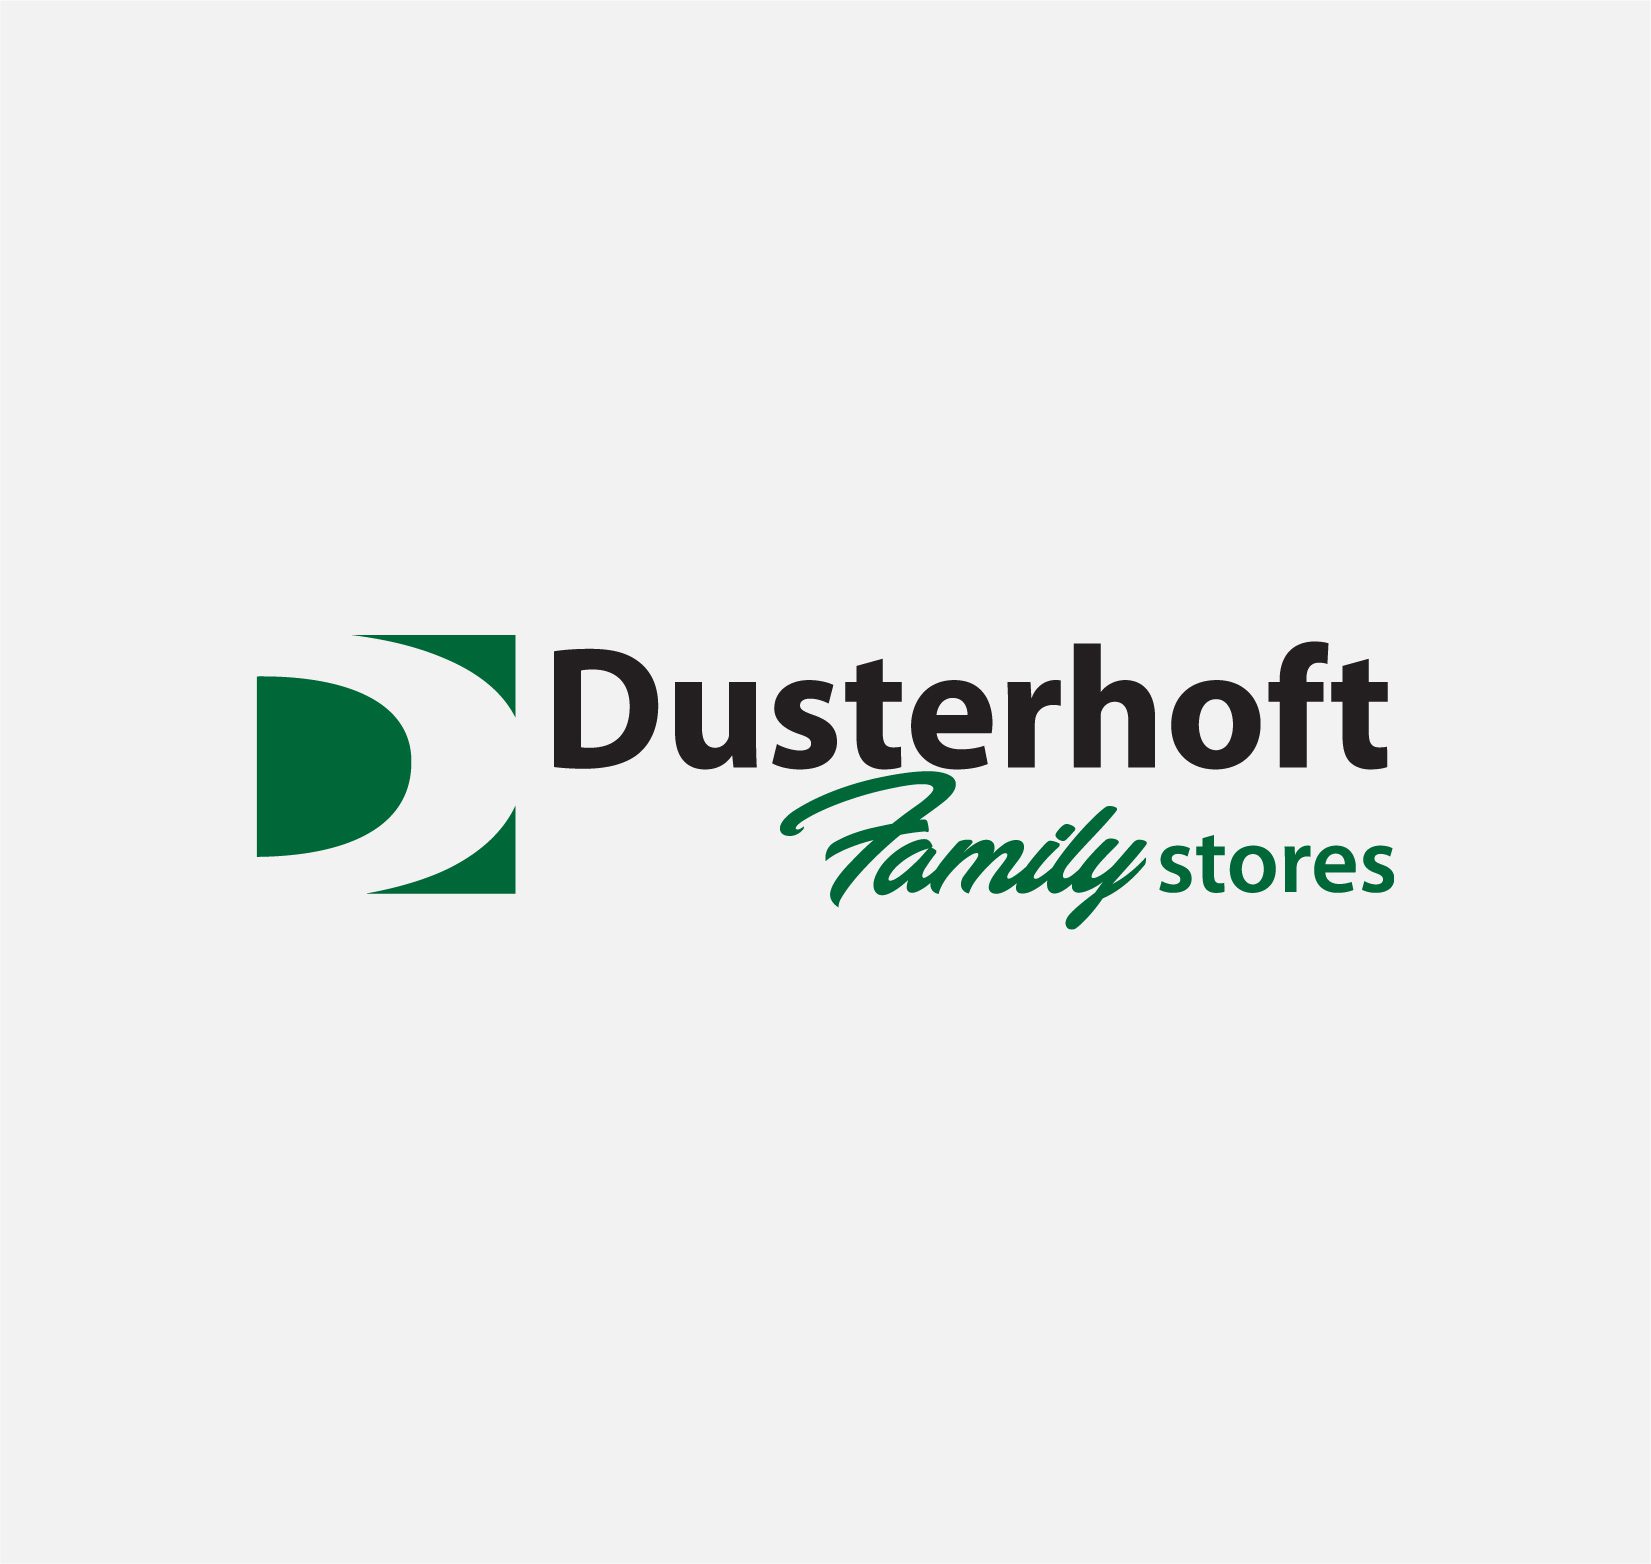 Dusterhoft Family stores